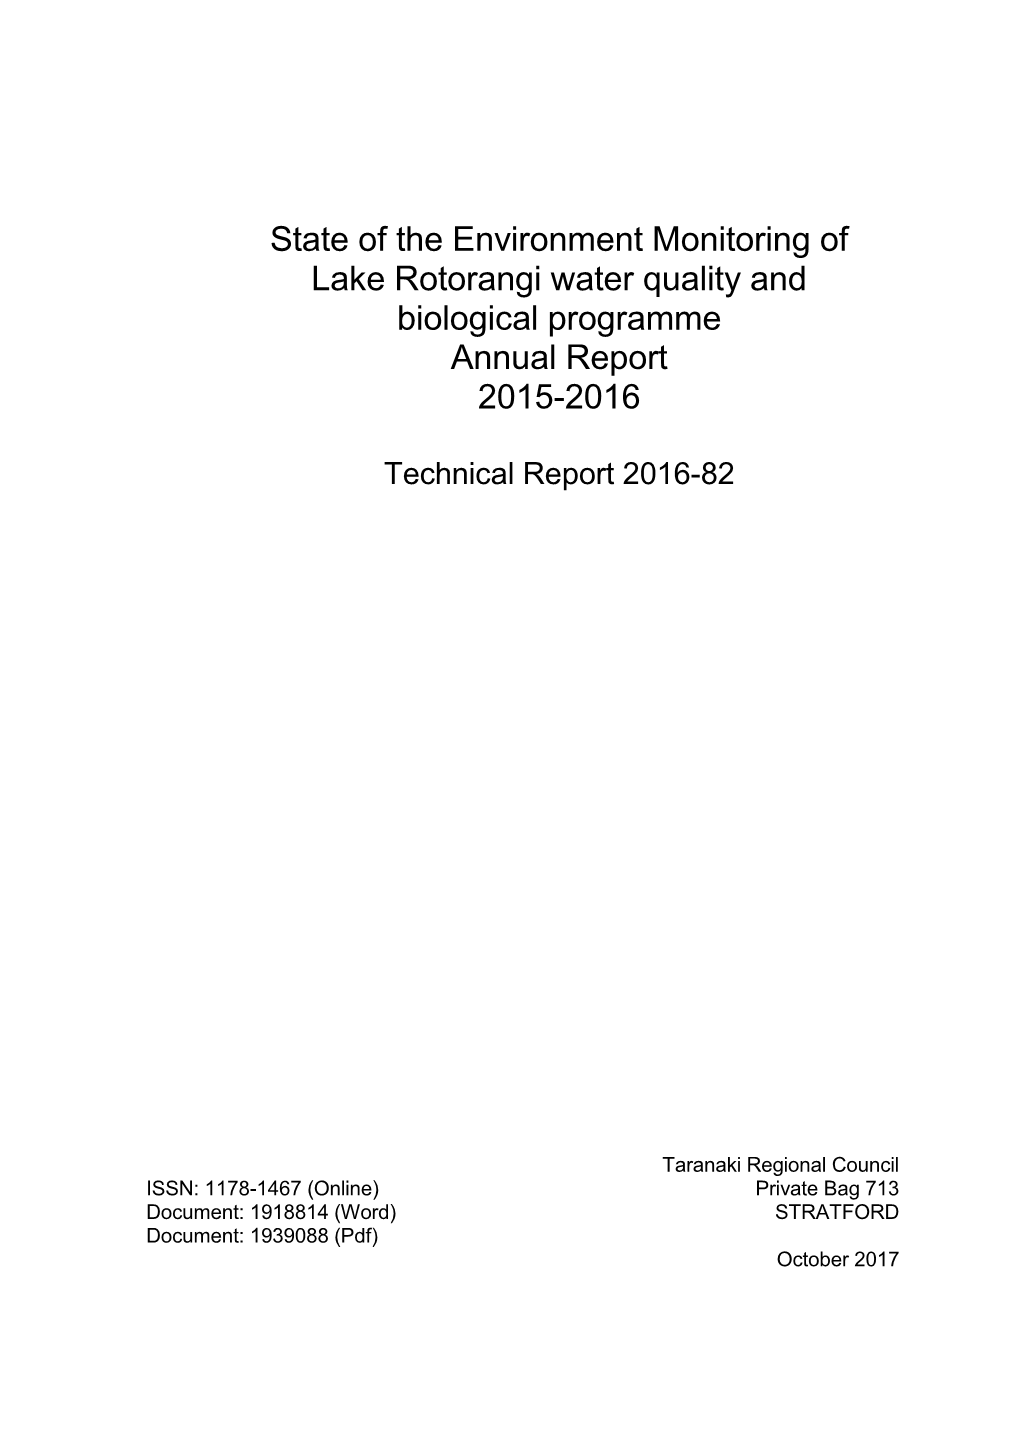 State of the Environment Monitoring Report 2015-2016